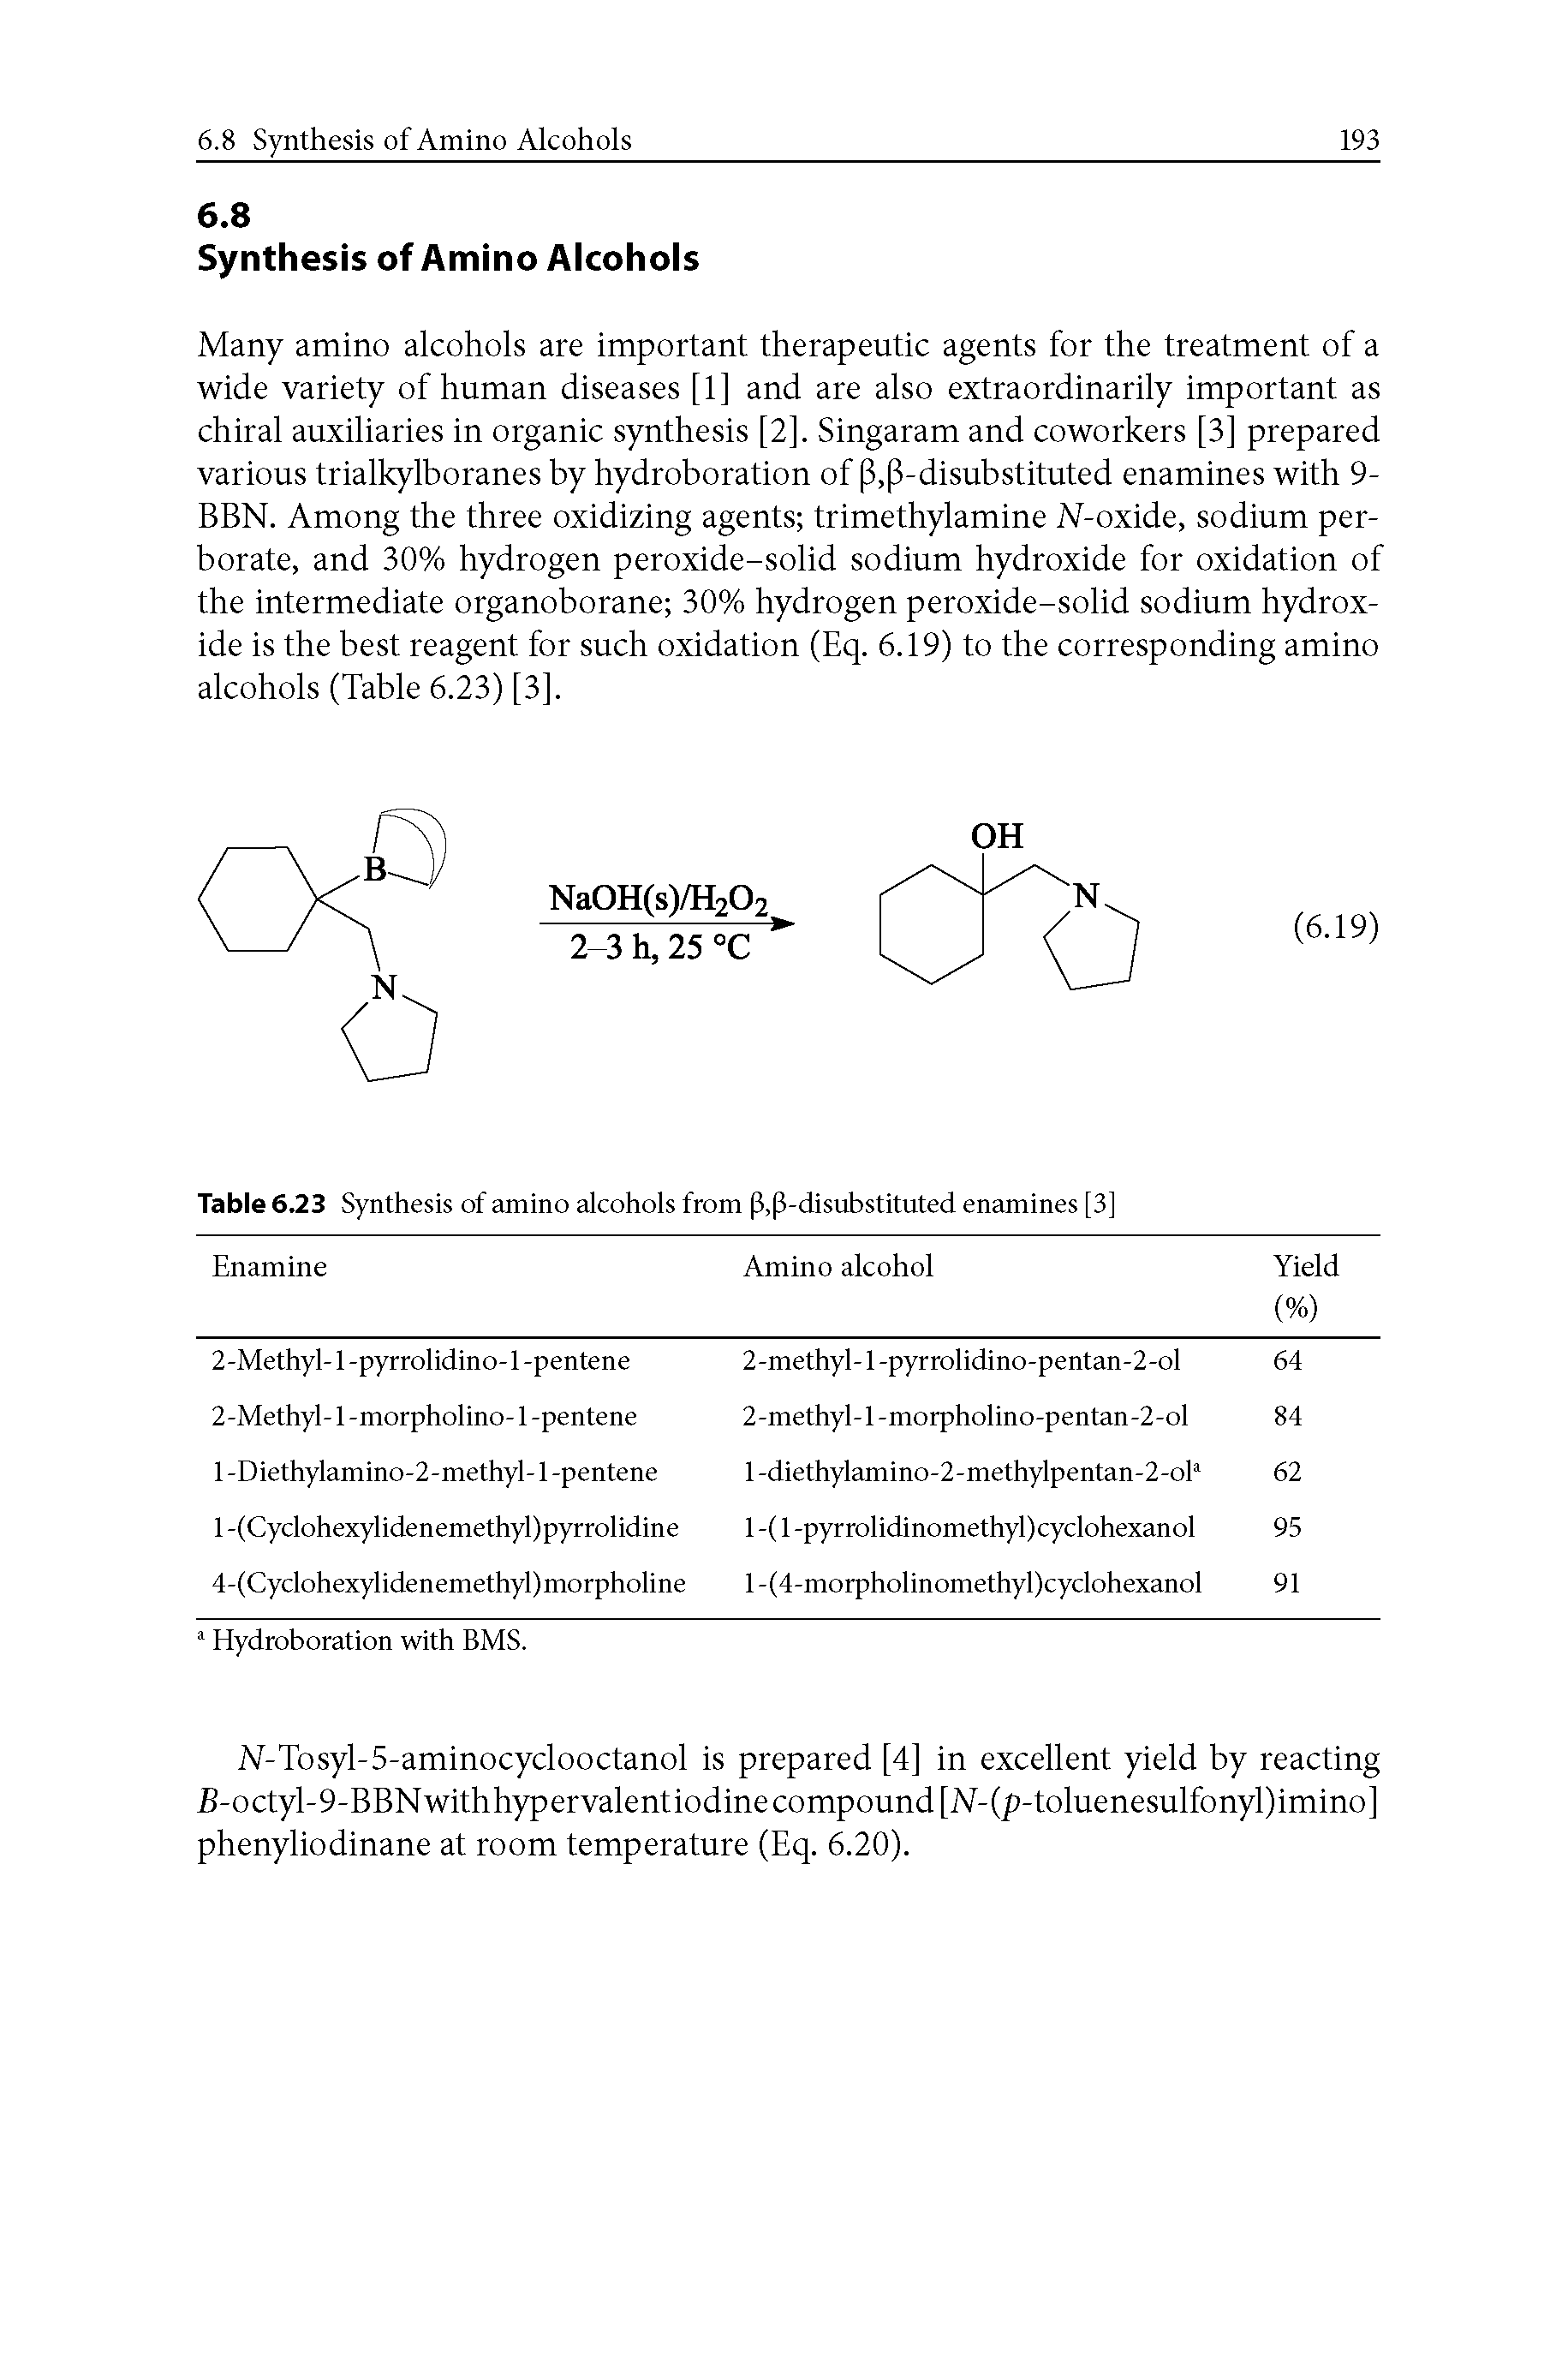 Table 6.23 Synthesis of amino alcohols from p,p-disubstituted enamines [3]...